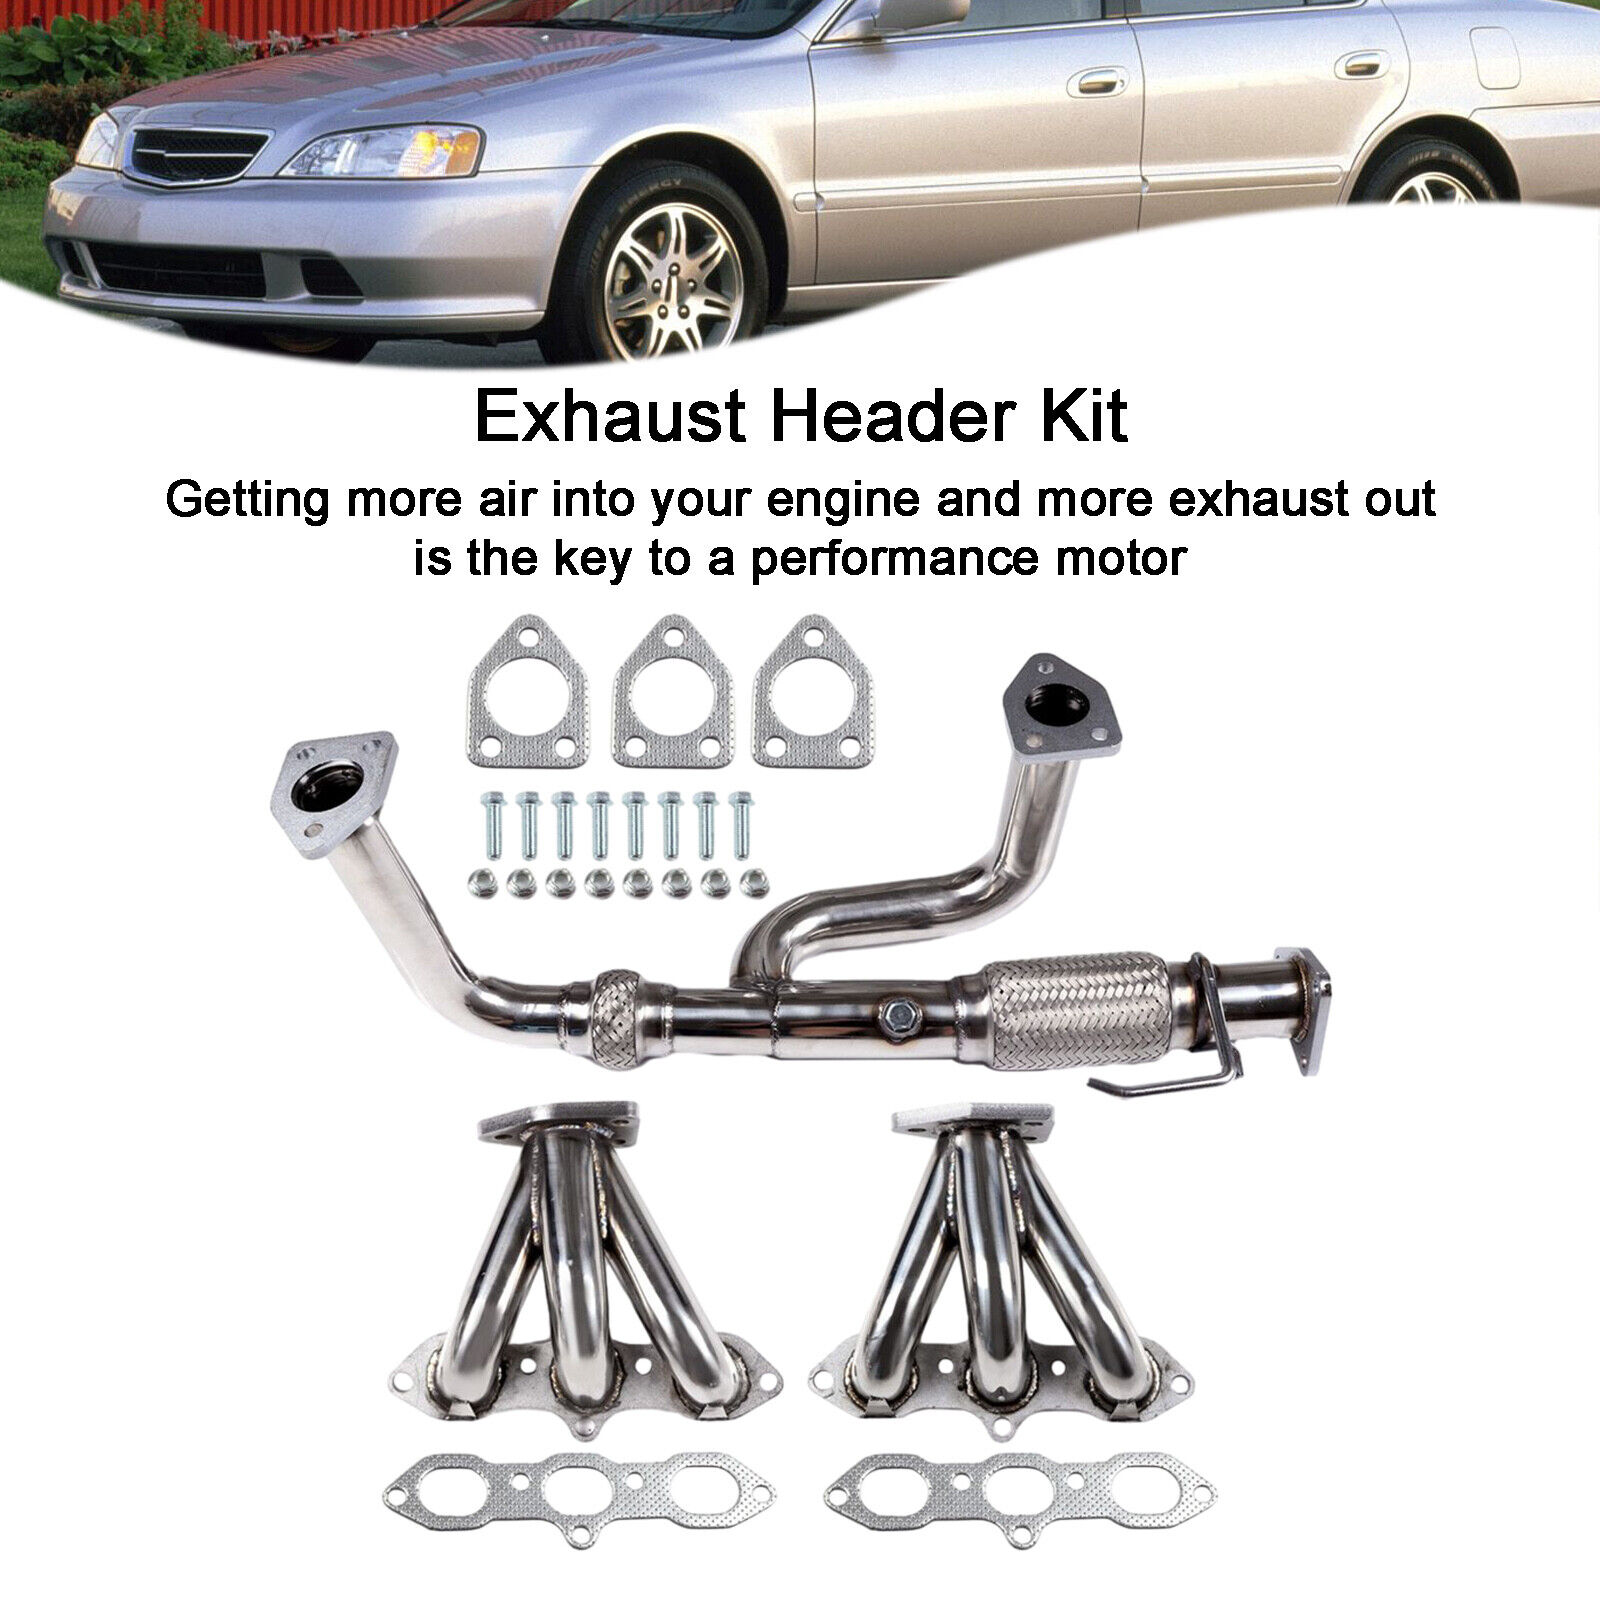 1× Exhaust Header Kit Fits Honda Accord 98-02 & Acura CL 02-03 / CL 99-03 3.2L